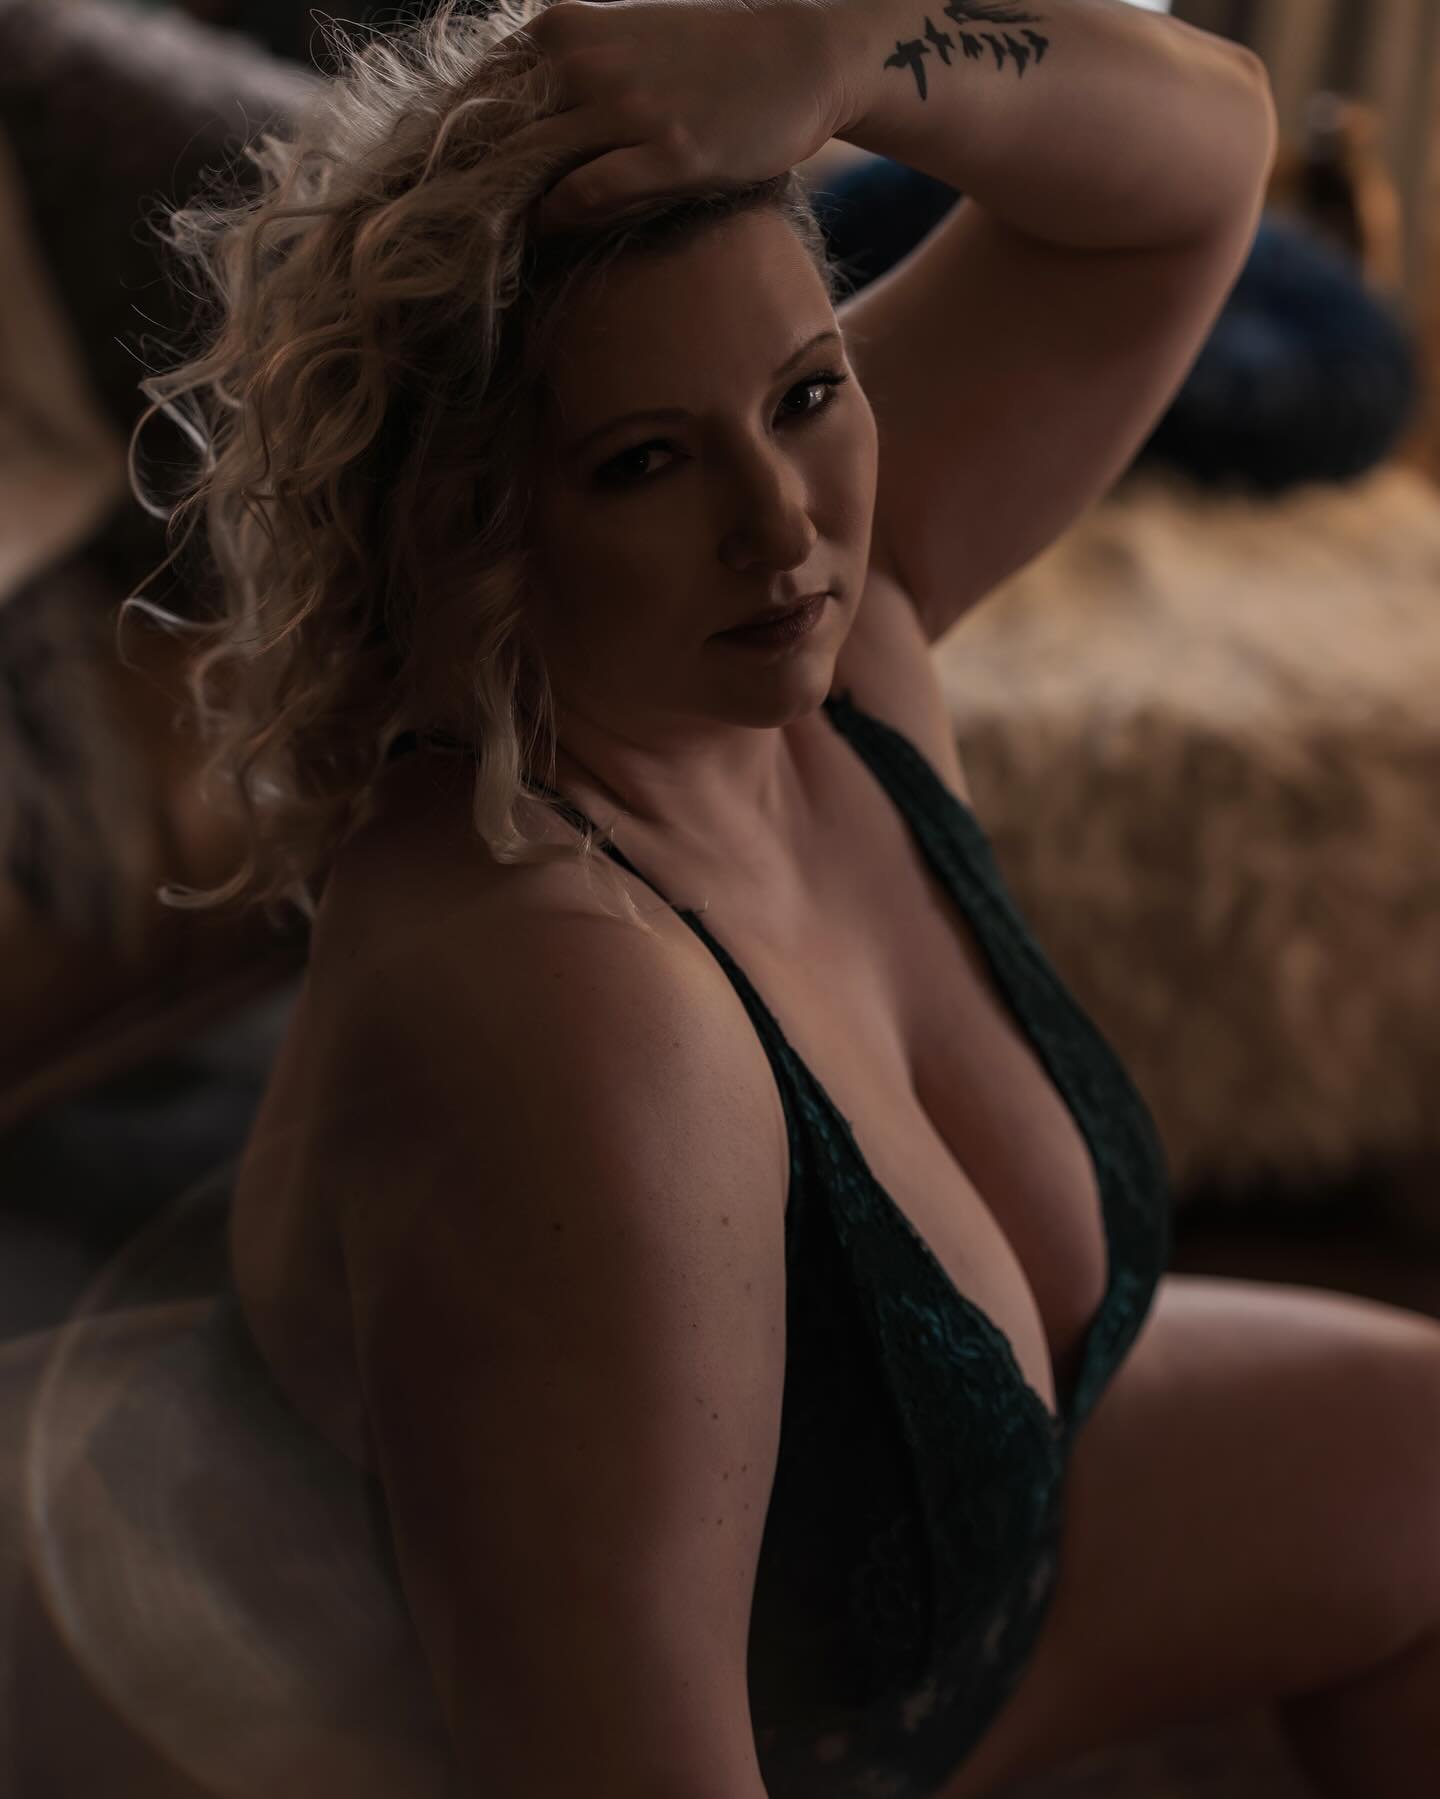 This incredible client said she wanted to sign our Model Release and share her photos publicly to inspire other plus-sized women to step into the spotlight and embrace their curves, as well. ✨Empowered women truly do empower women.✨
.
.
.
#embraceyou